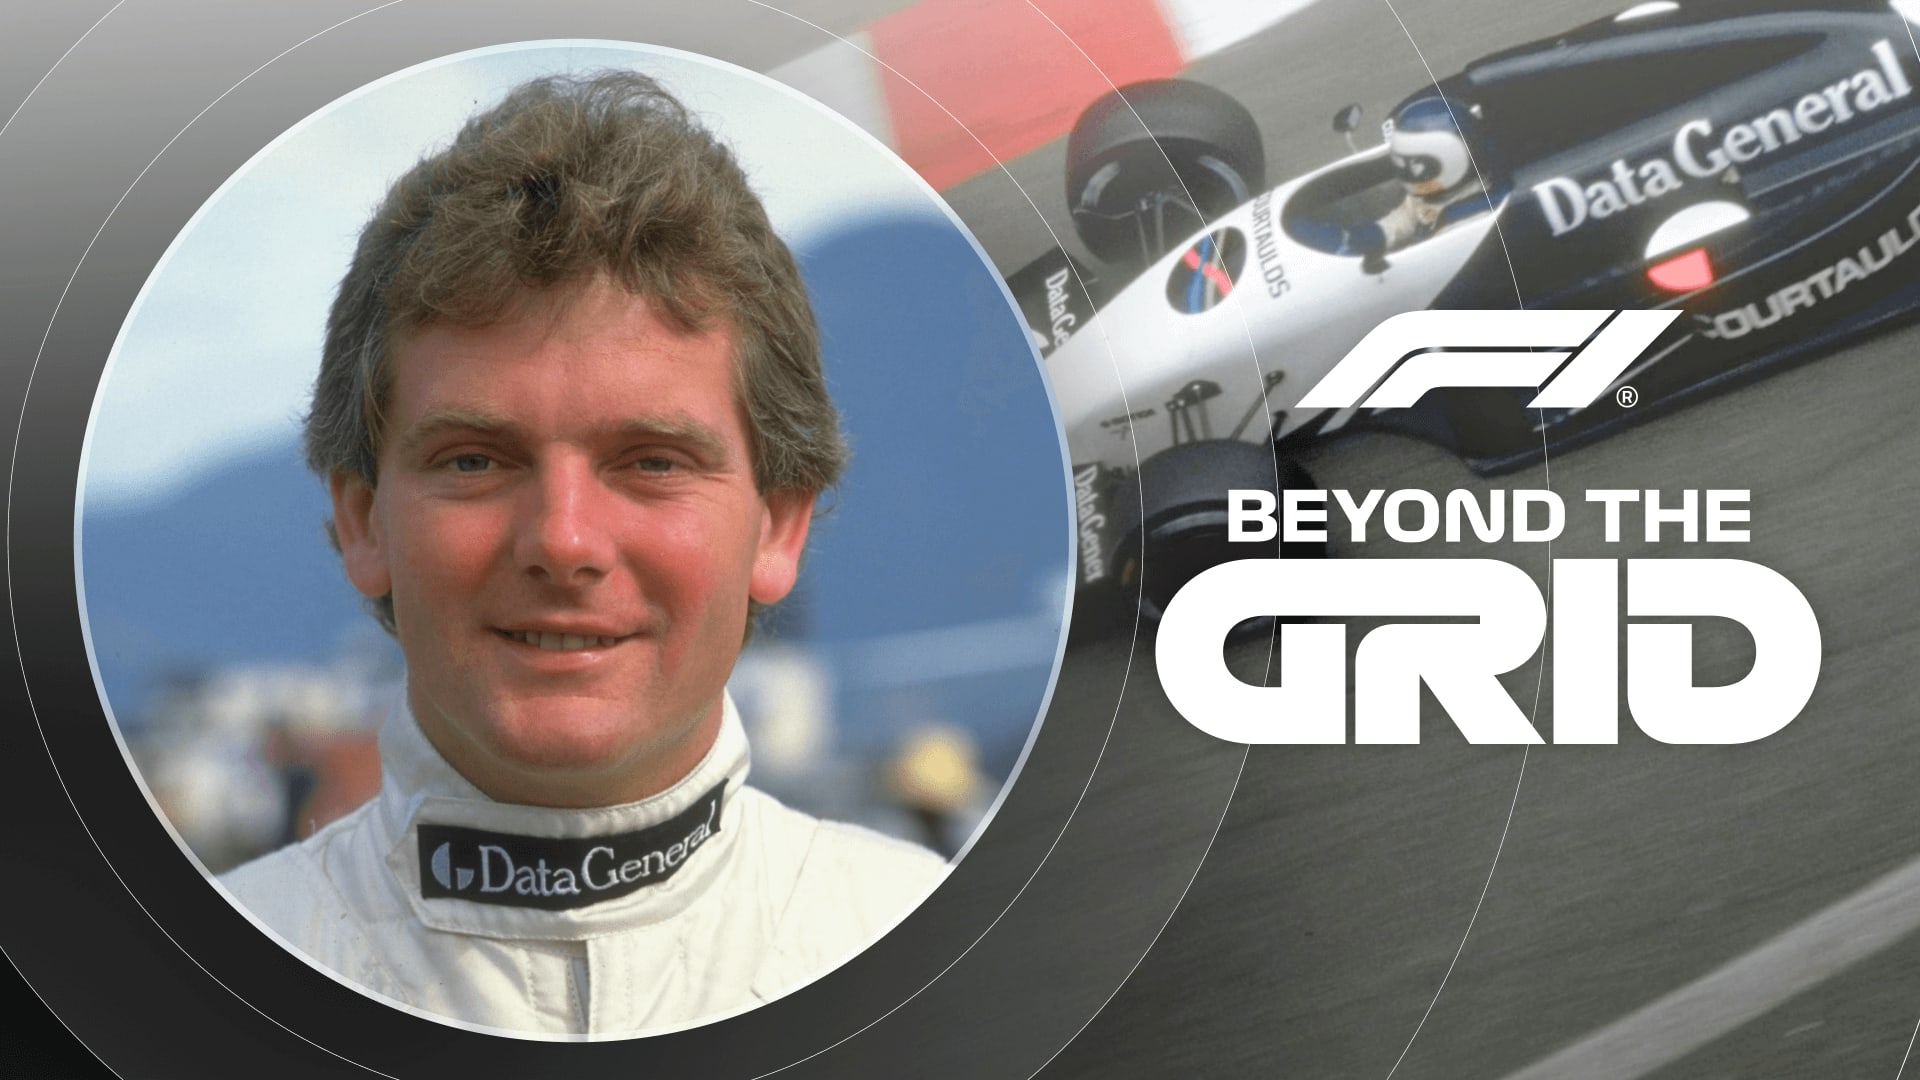 BEYOND THE GRID Jonathan Palmer on qualifying as a doctor, reaching the F1 grid and working with Senna Formula 1®